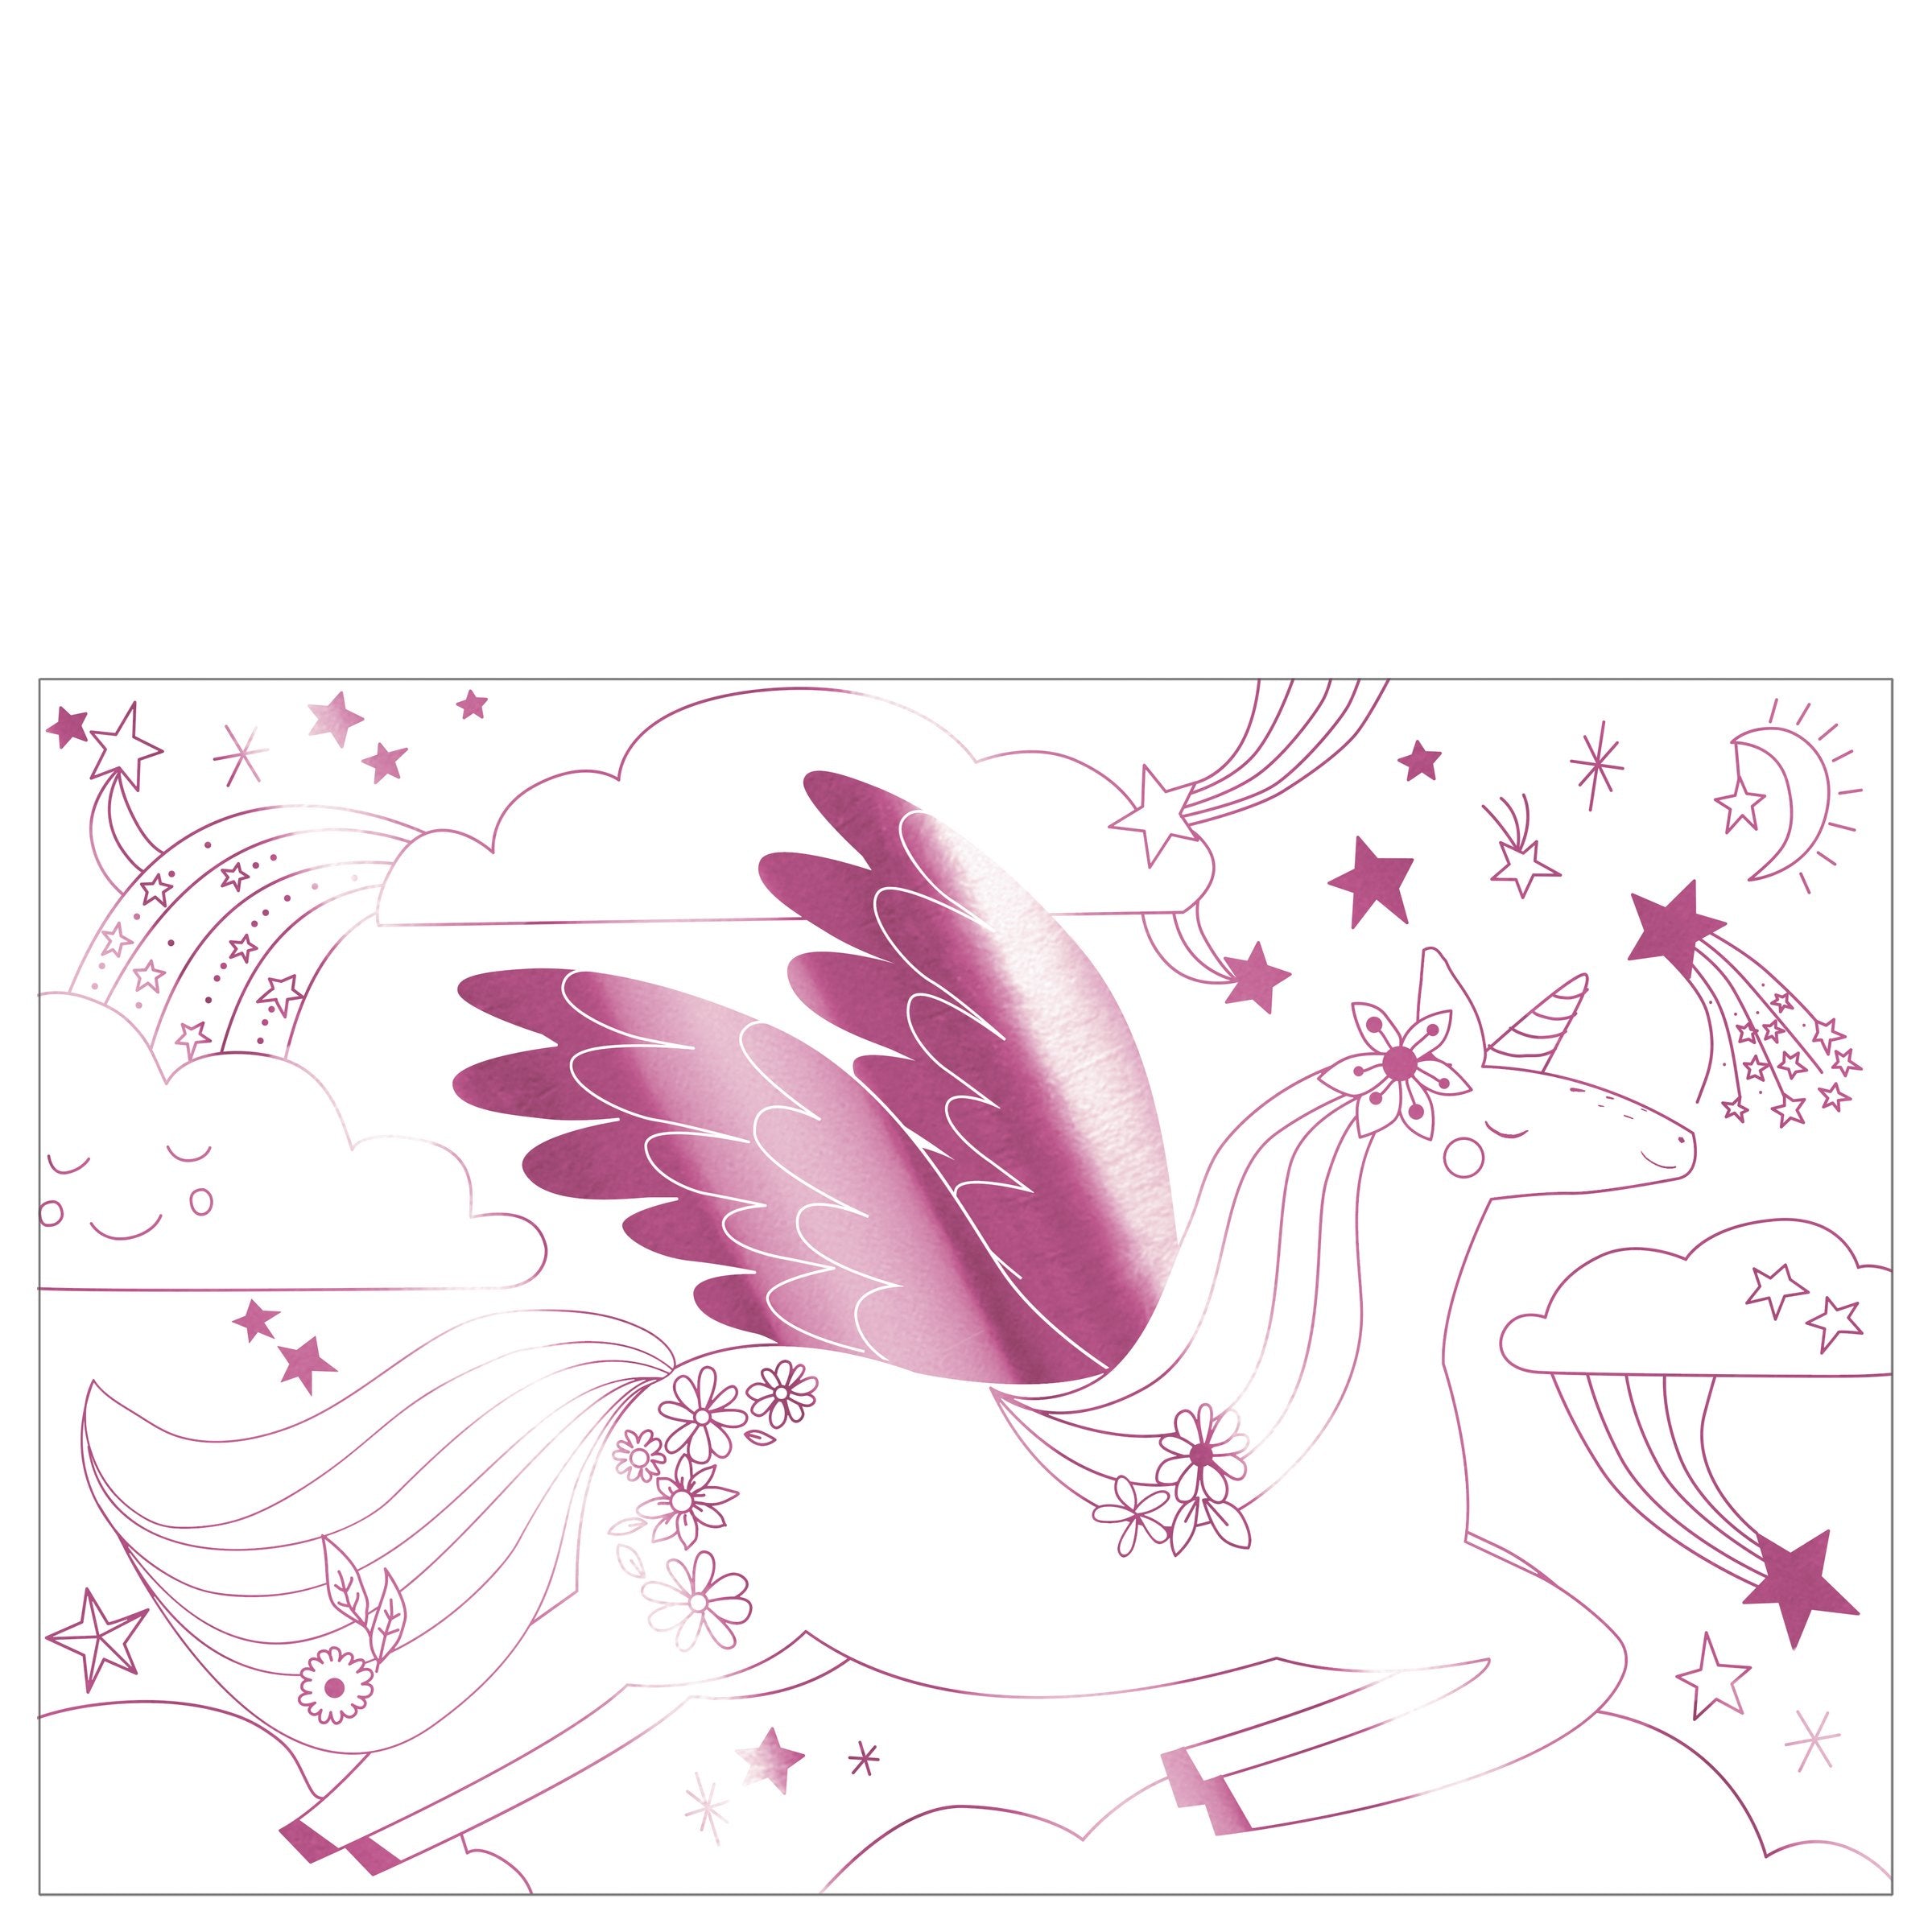 The pink foil illustrations of unicorns in a happy world are fun to colour in.